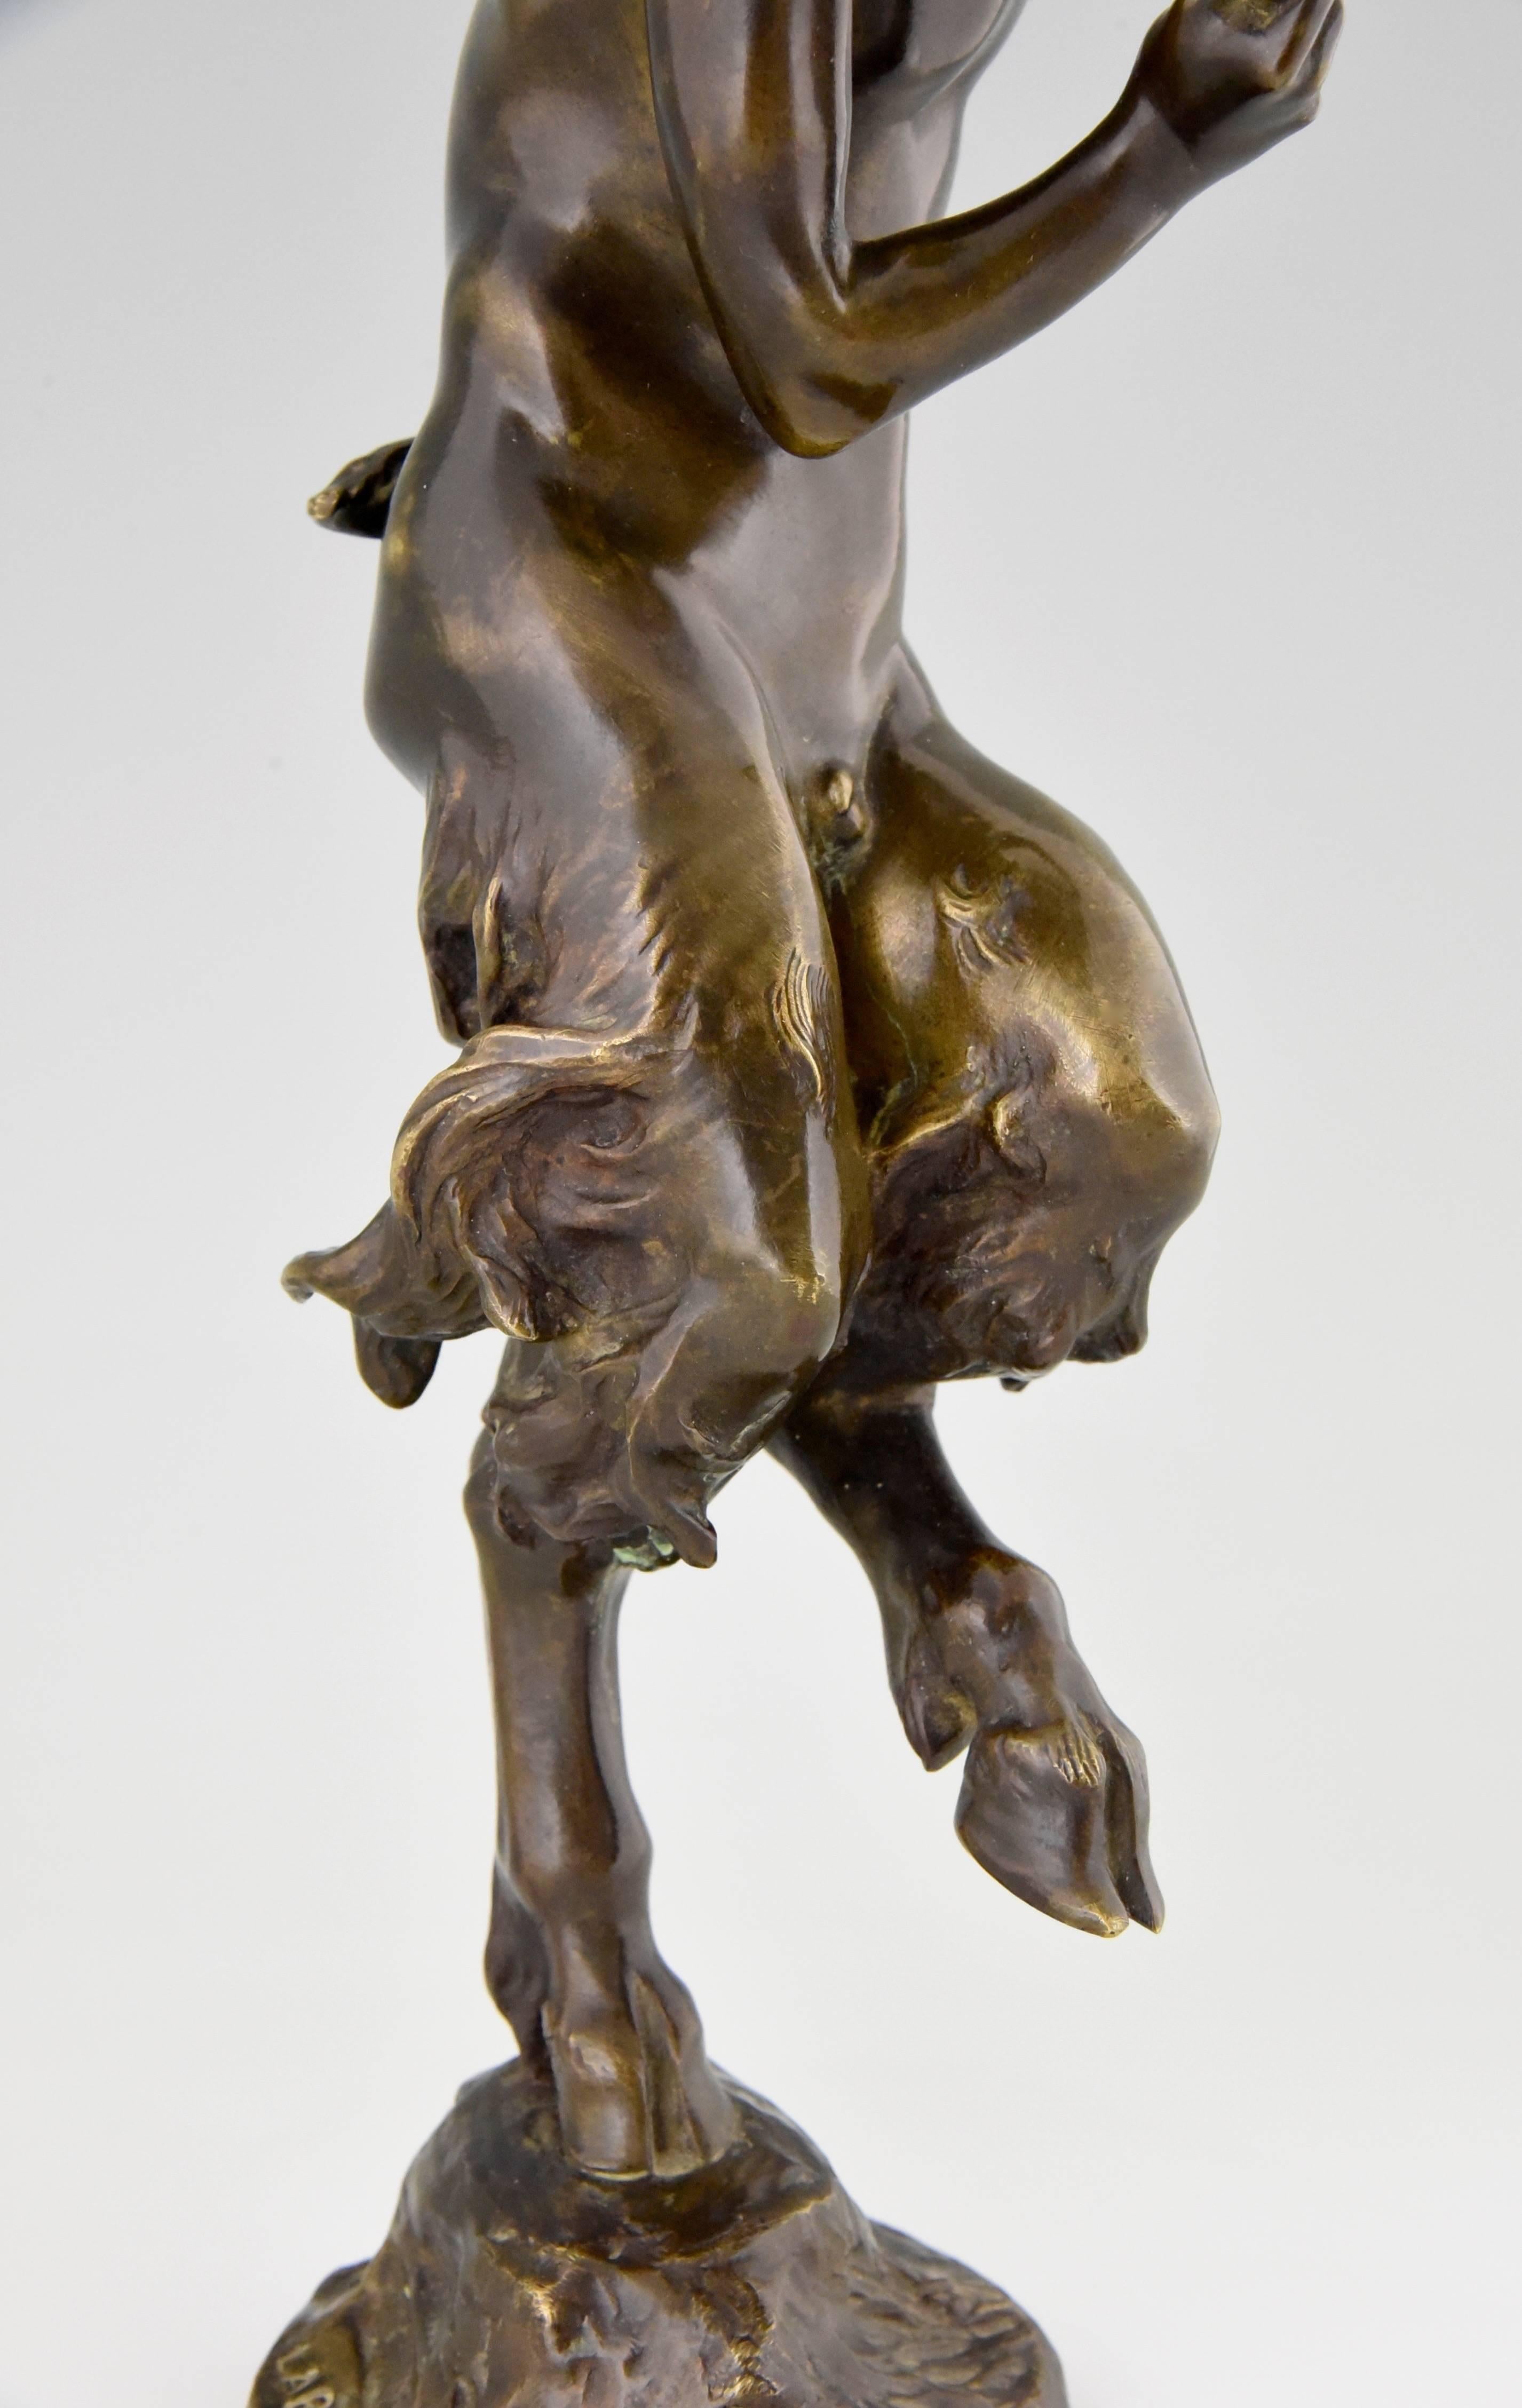 Patinated Antique Bronze Sculpture of a Dancing Satyr by Jules Jacques Labatut 1880